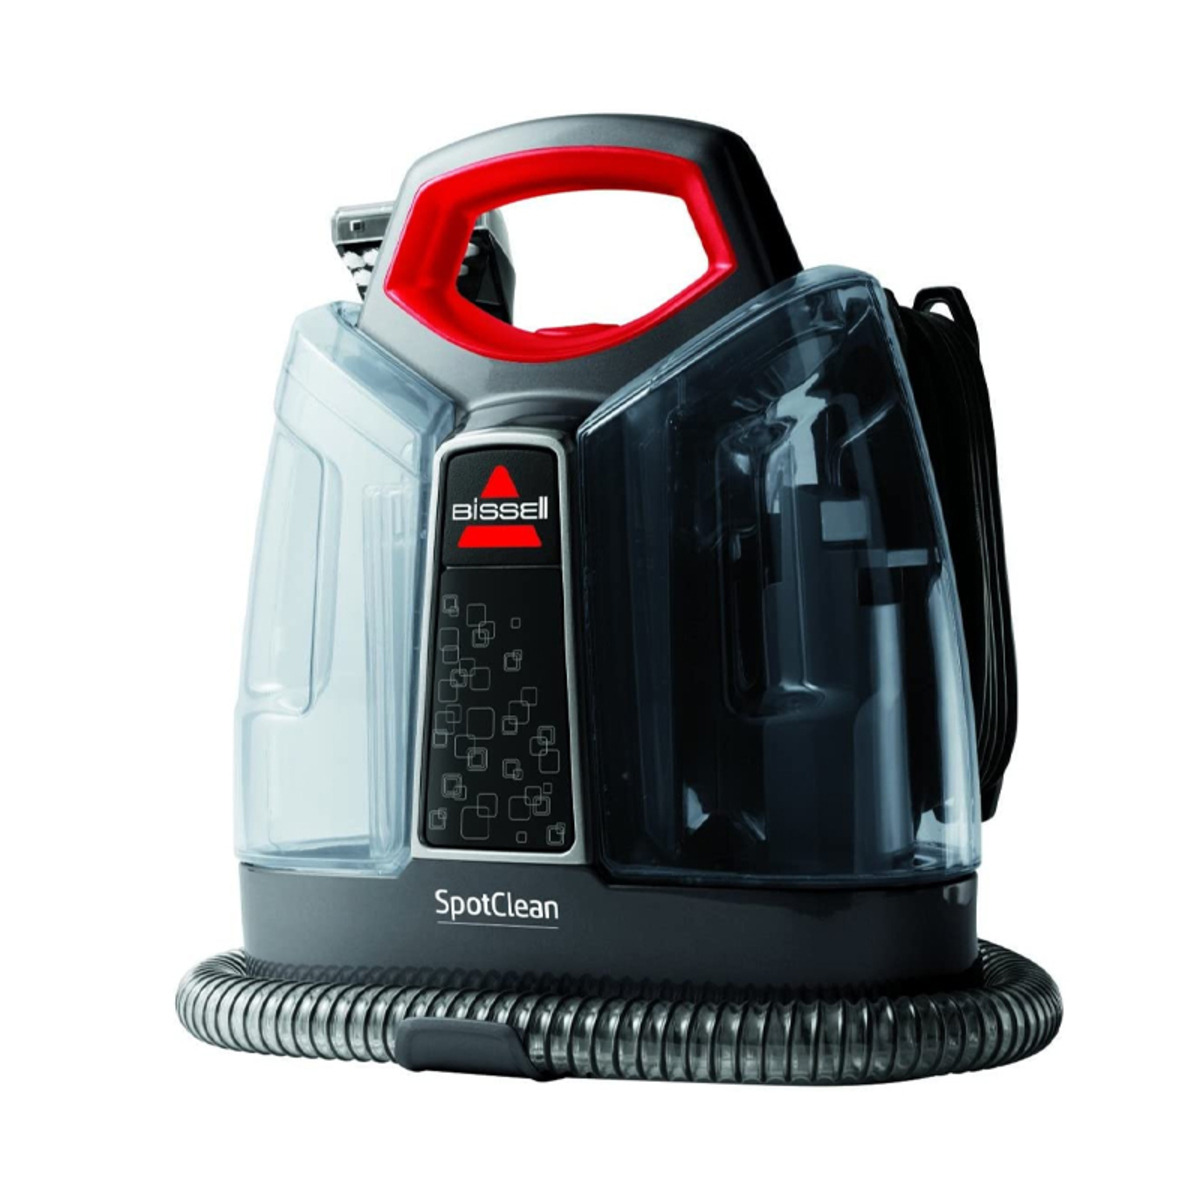 Image of Bissell 36981 SpotClean Portable Carpet Cleaner